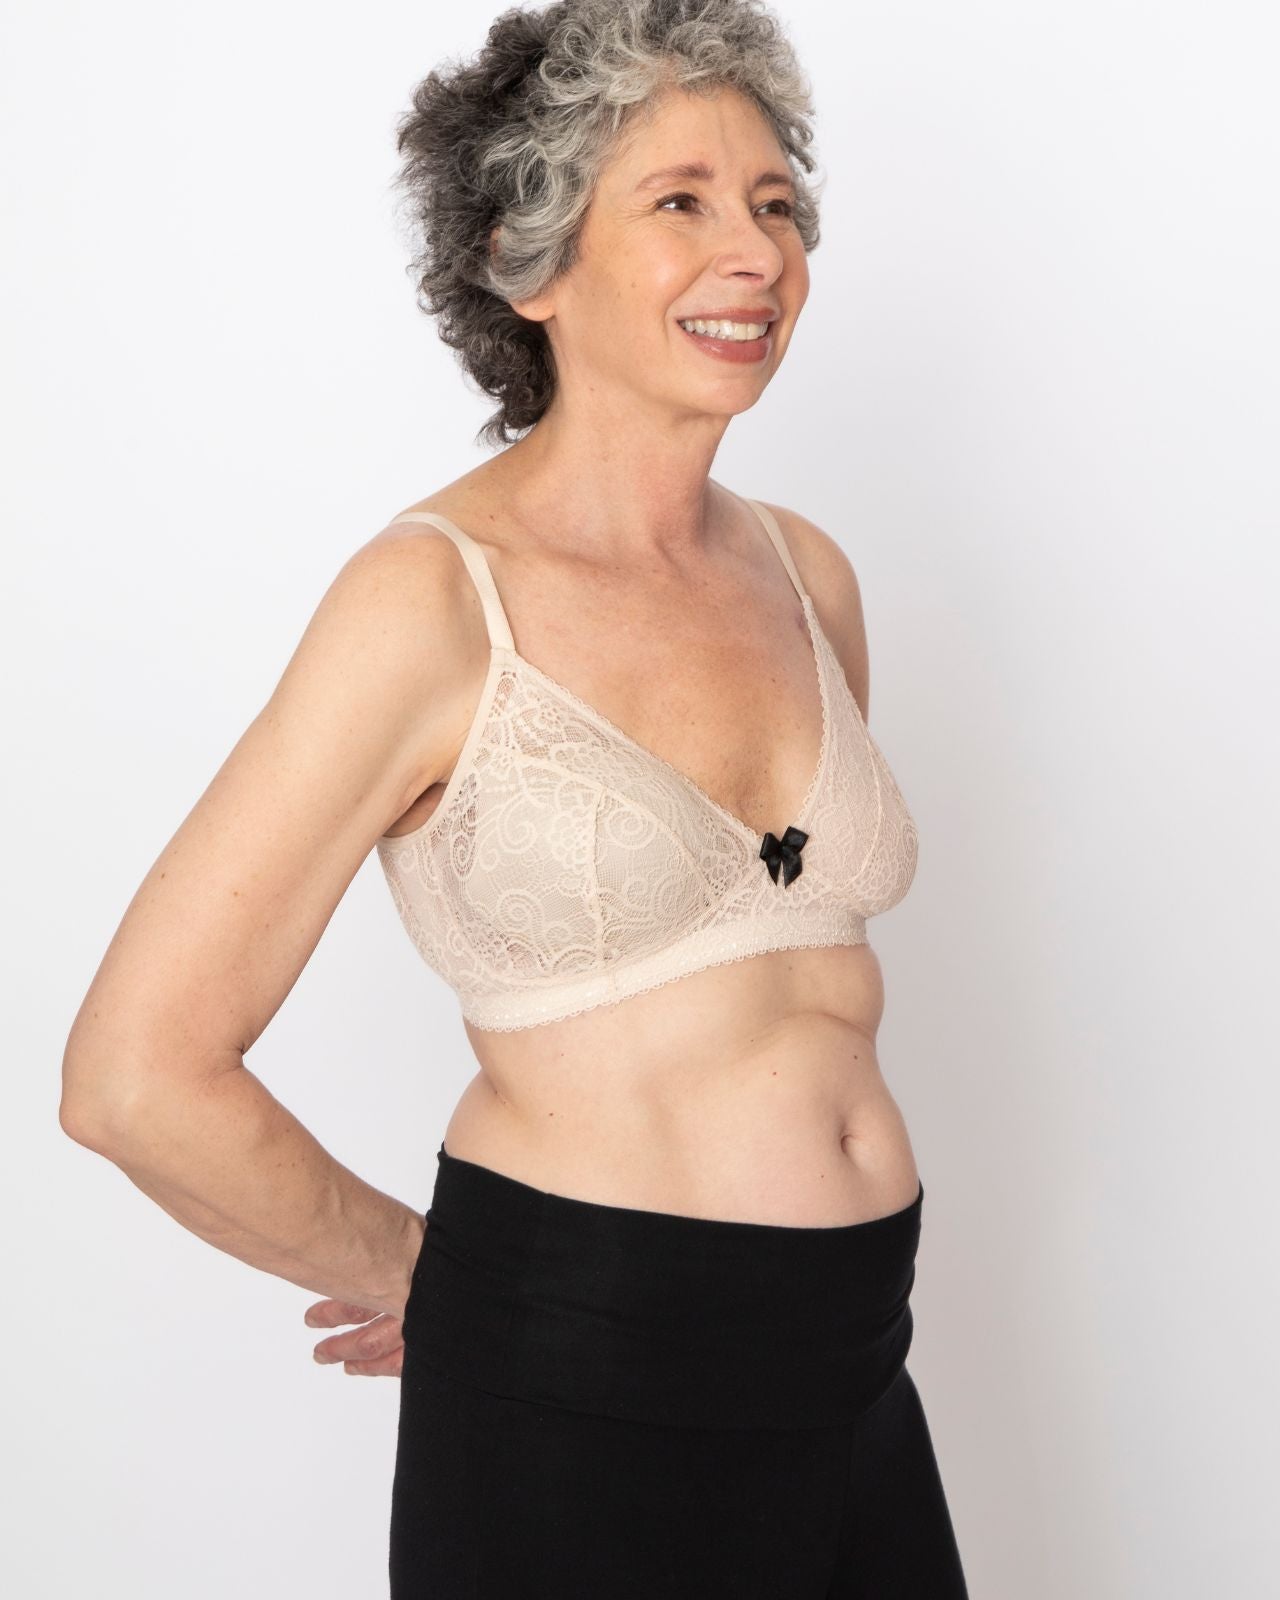 AnaOno Gloria Pocketed Wireless Post Surgical Bra, Black, Size M, from Soma